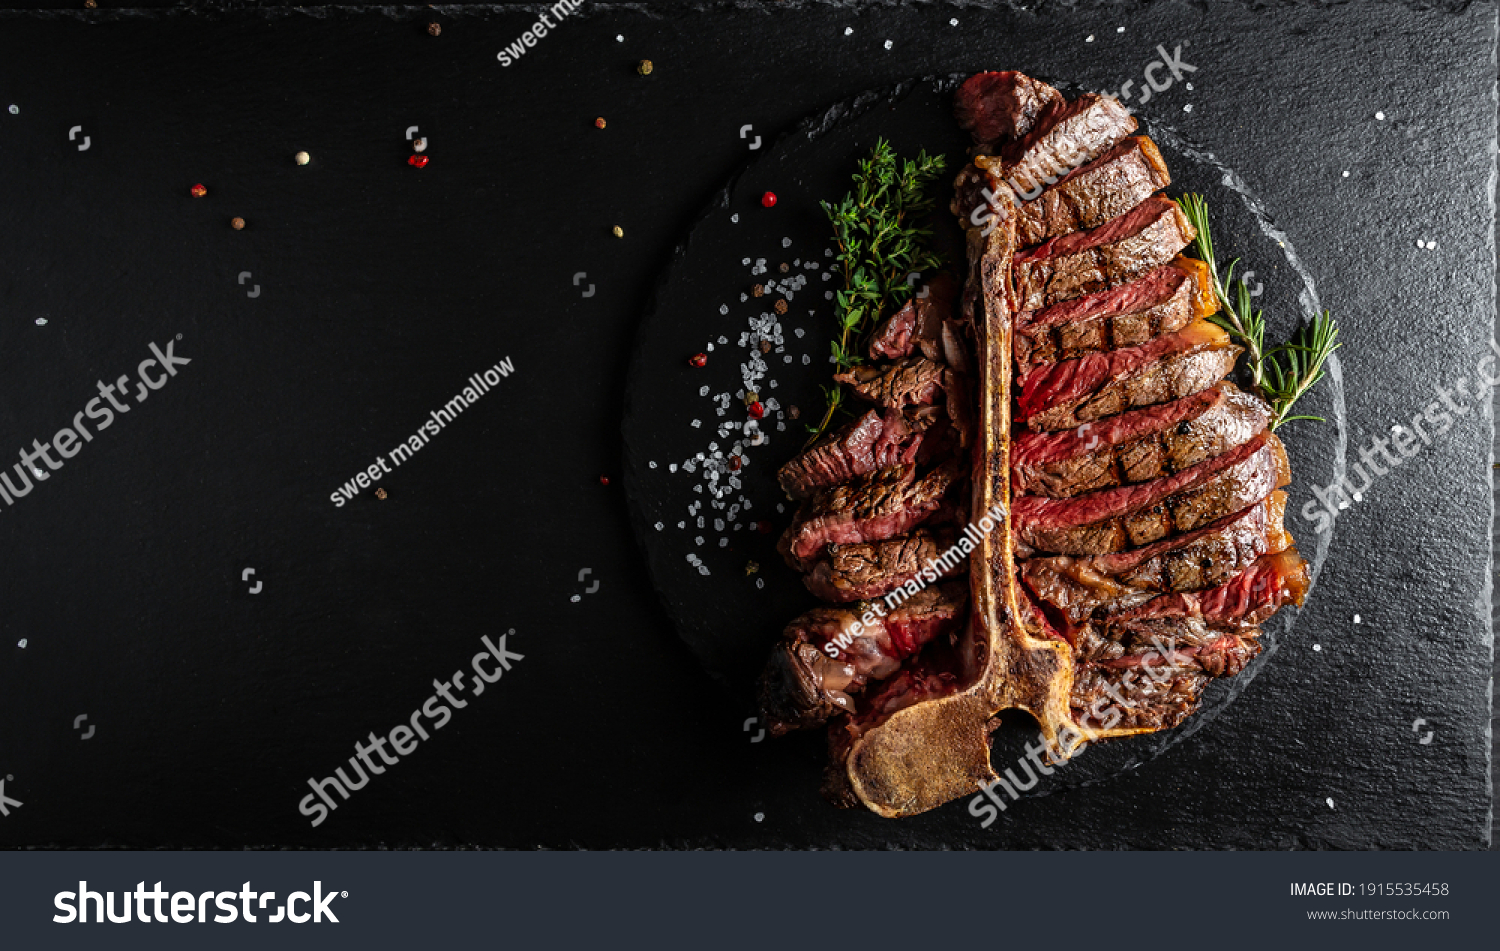 Barbecue dry aged wagyu porterhouse steak, grilled medium rare beef steak with spices served on slate board. sliced. Long banner format, top view. #1915535458